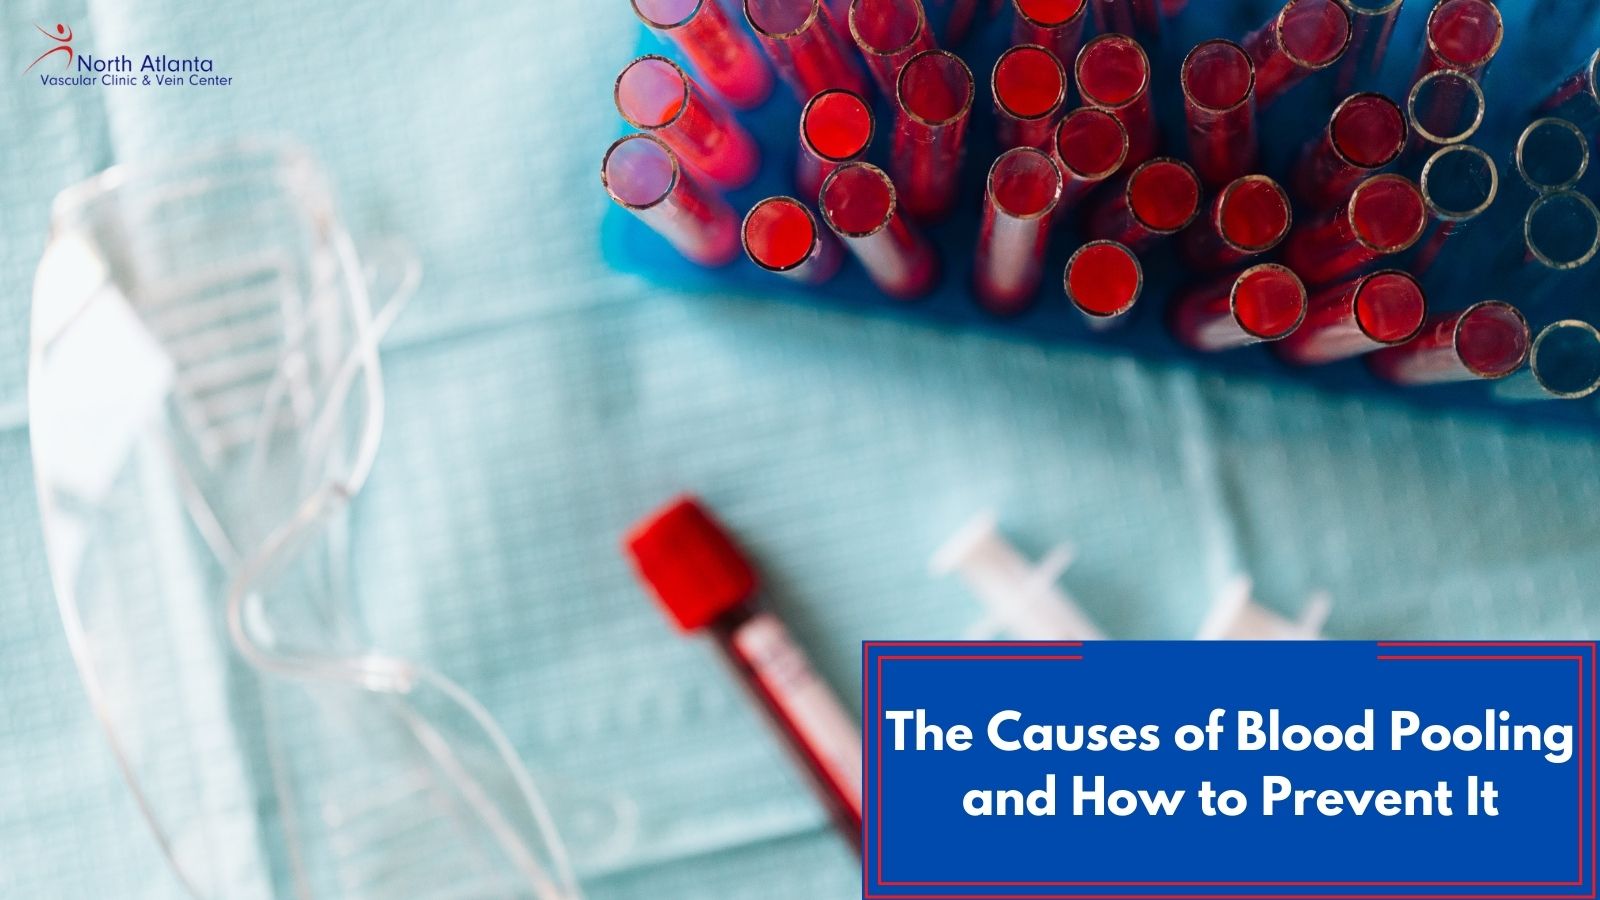 The Causes of Blood Pooling and How to Prevent It